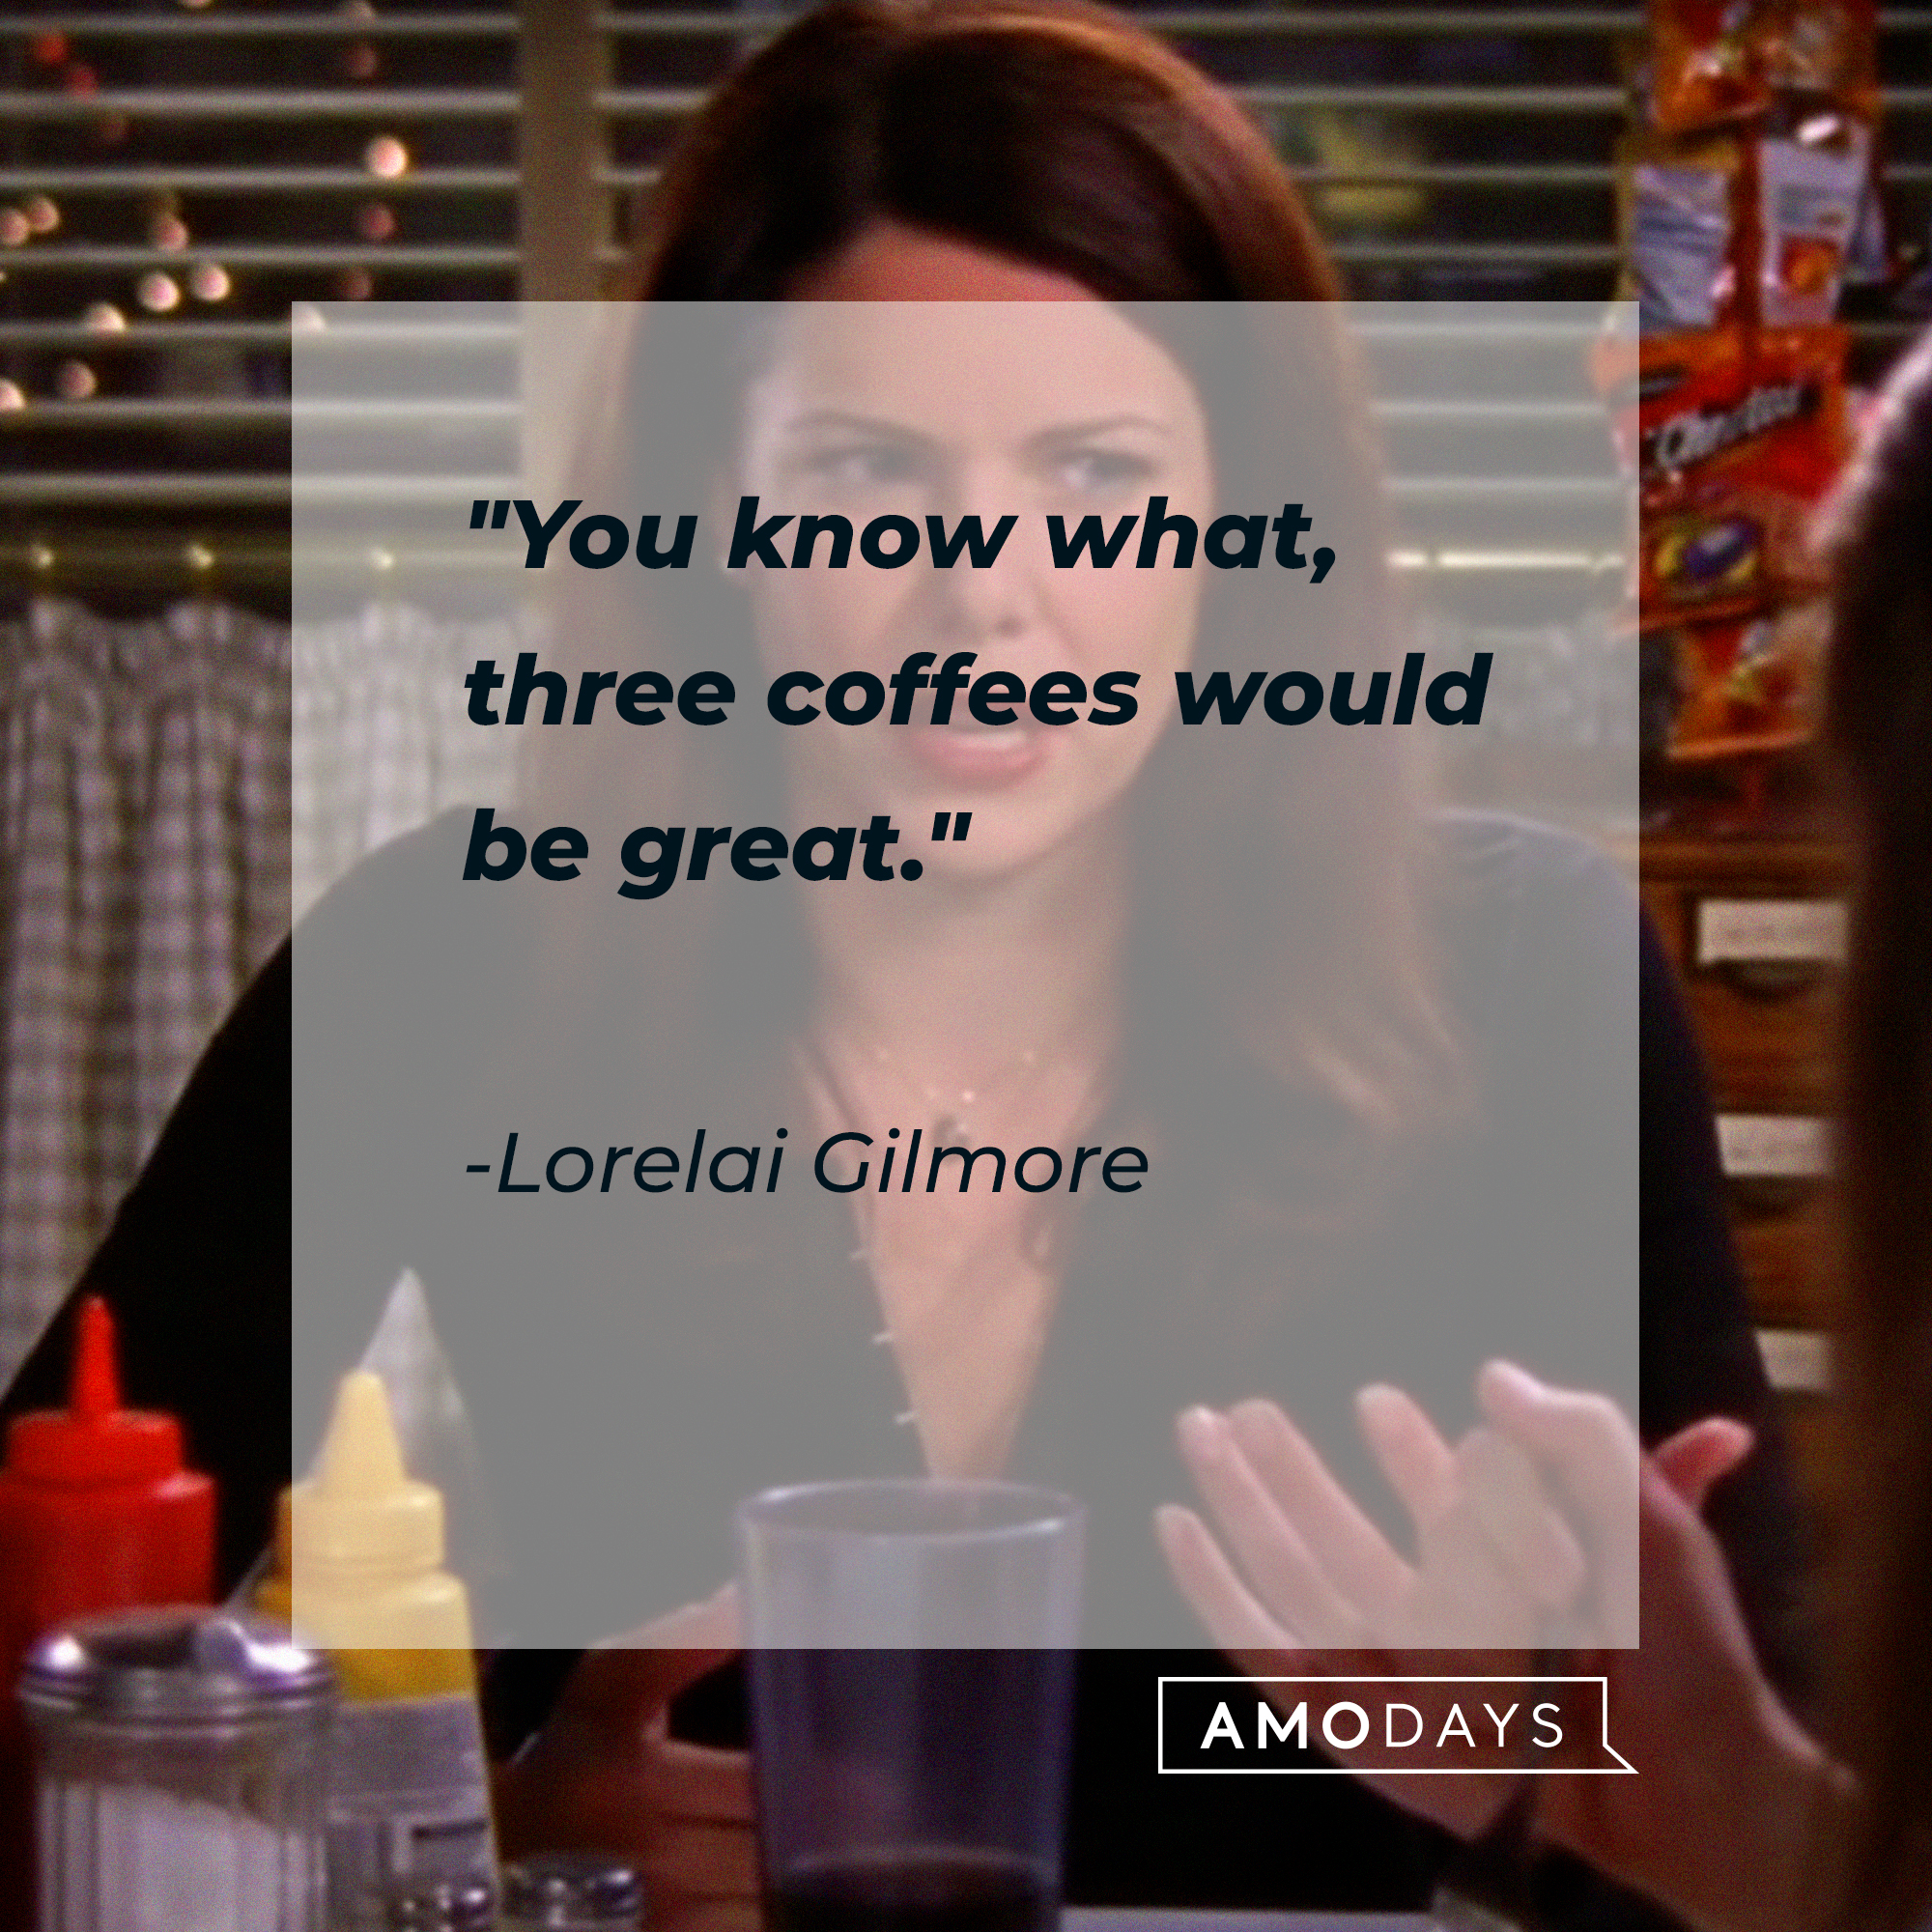 Lorelai Gilmore's quote: "You know what, three coffees would be great." | Source: facebook.com/GilmoreGirls